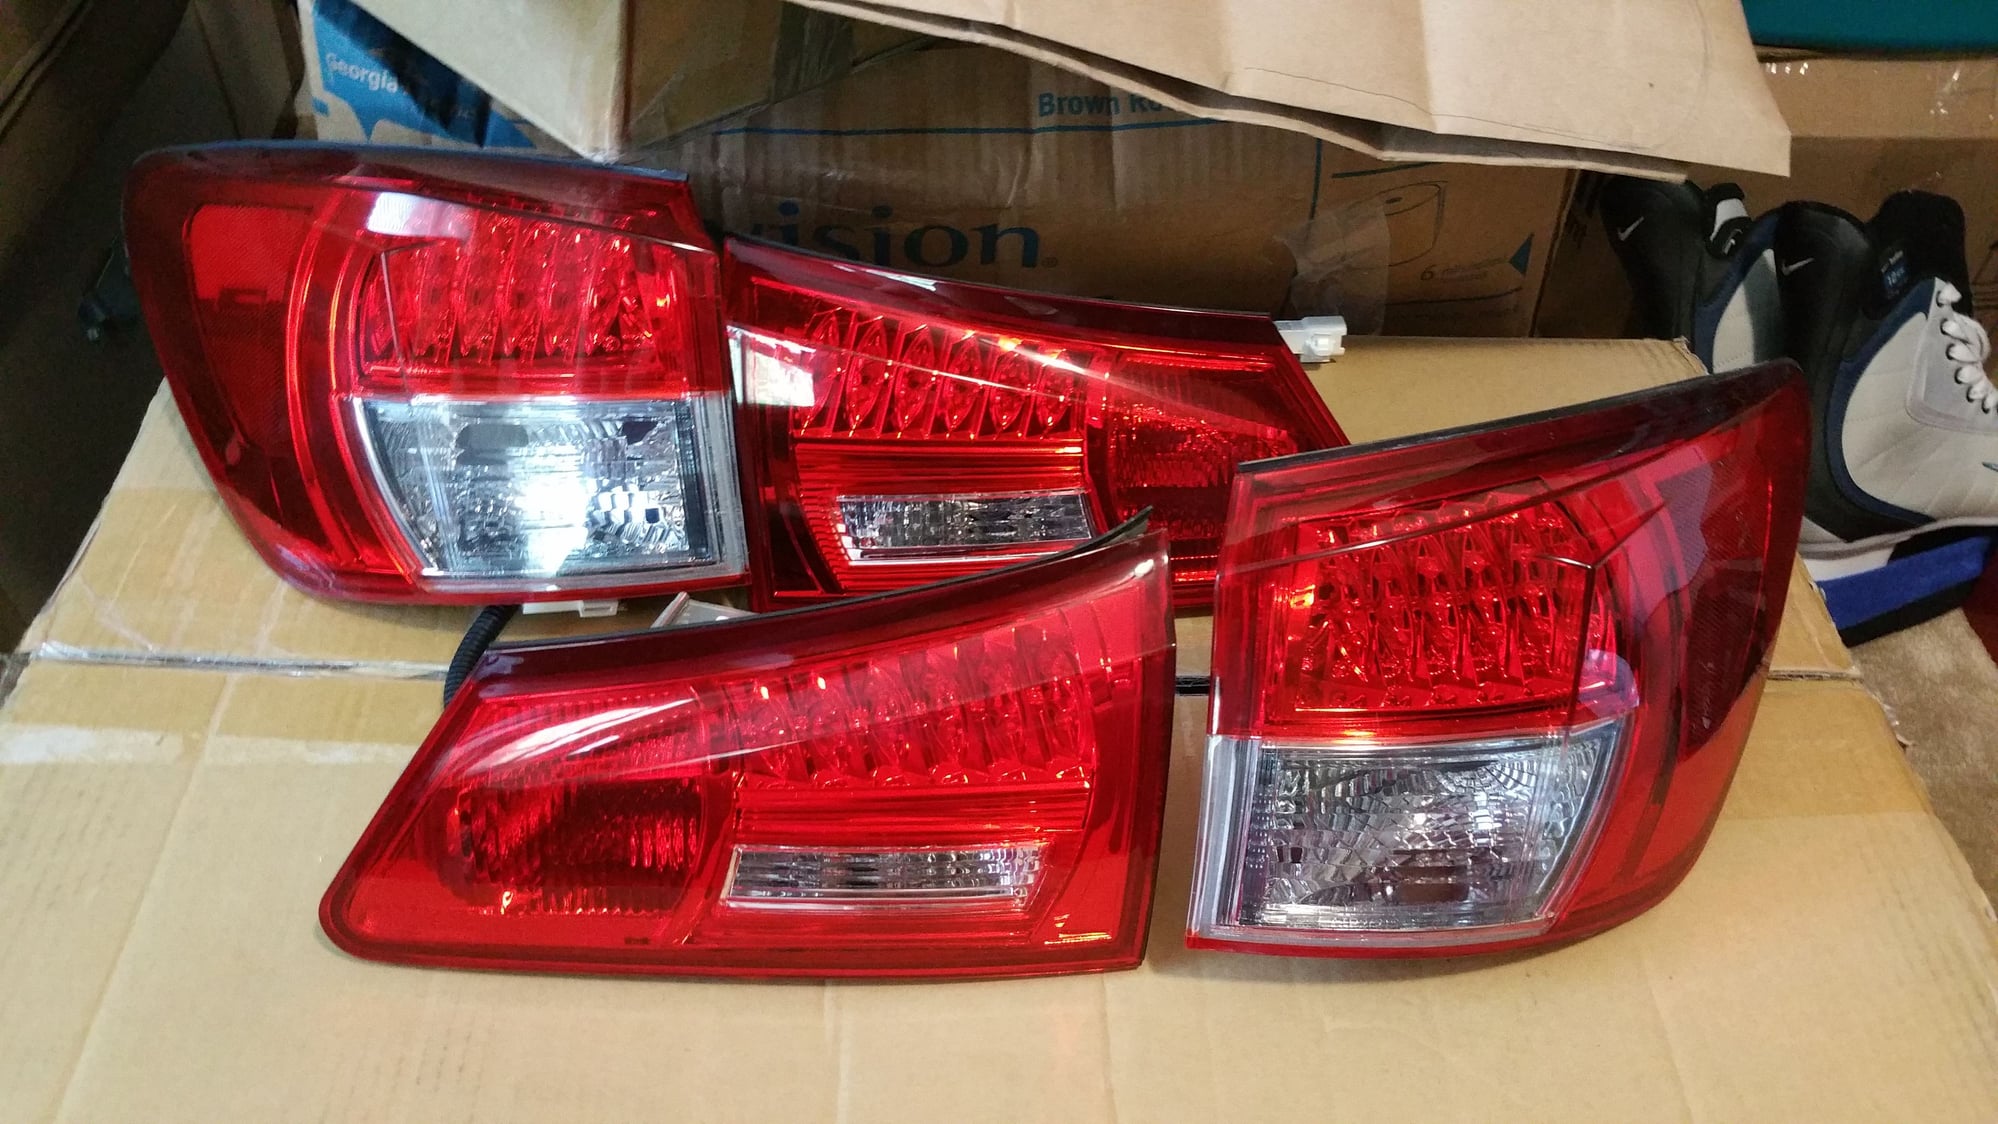 Lights - FS: ISF tail lights - Used - 2006 to 2012 Lexus IS250 - 2006 to 2012 Lexus IS350 - 2006 to 2012 Lexus IS F - Smyrna, GA 30080, United States